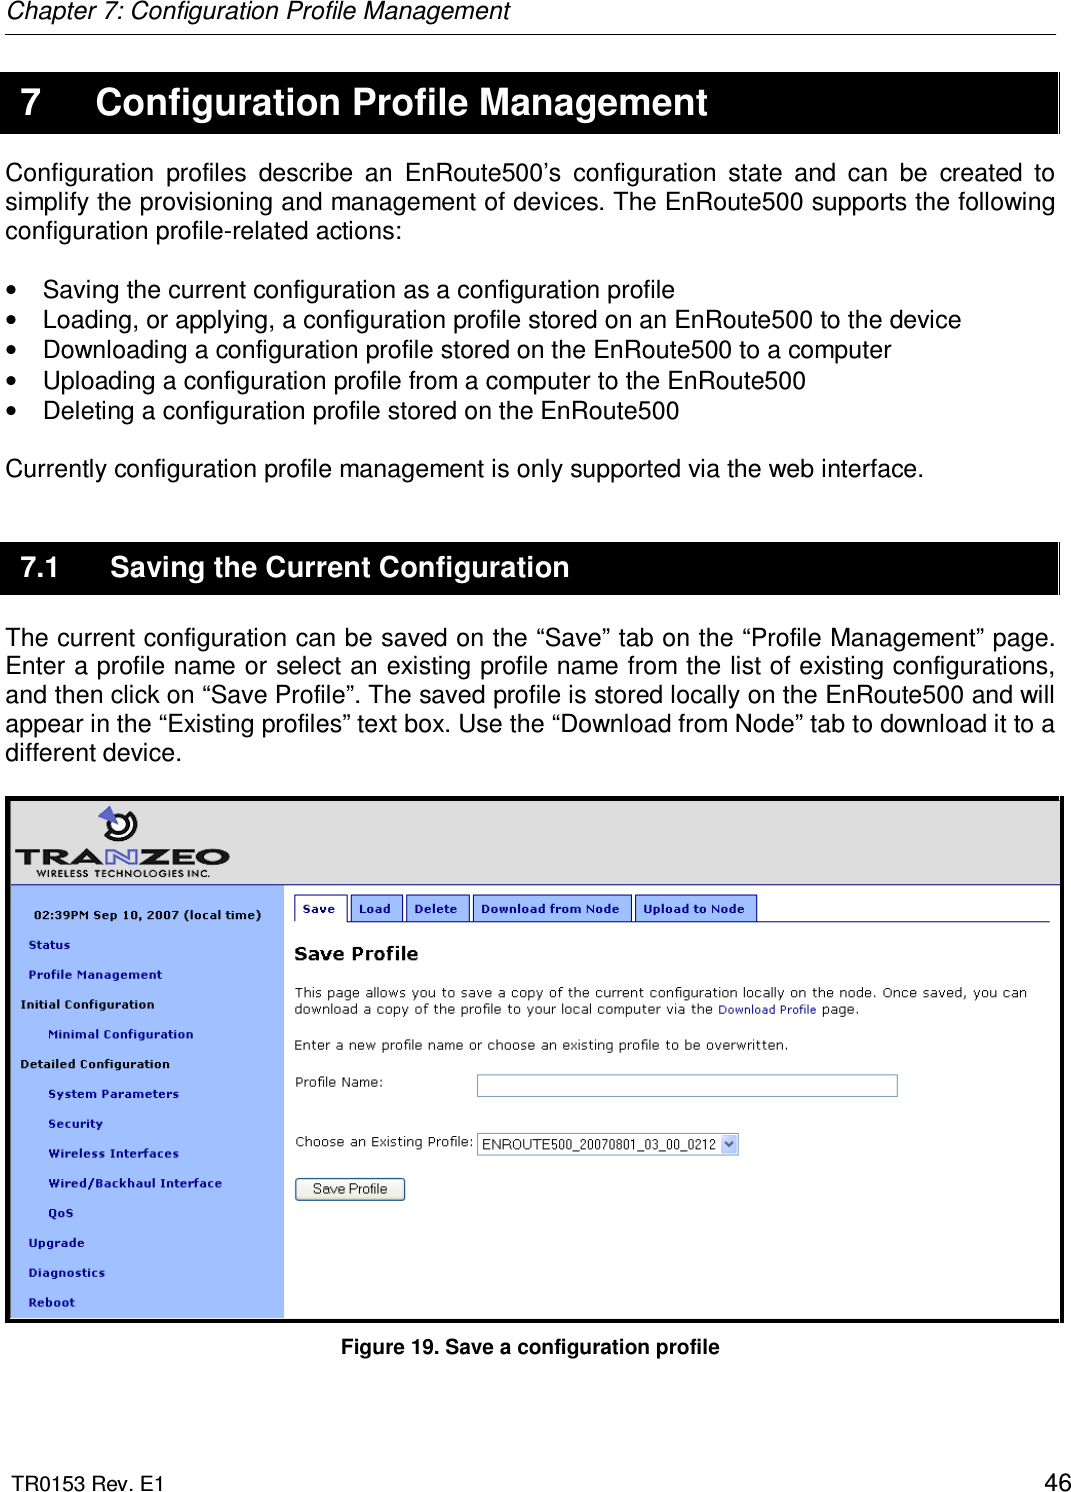 Chapter 7: Configuration Profile Management  TR0153 Rev. E1    46 7  Configuration Profile Management Configuration  profiles  describe  an  EnRoute500’s  configuration  state  and  can  be  created  to simplify the provisioning and management of devices. The EnRoute500 supports the following configuration profile-related actions:  •  Saving the current configuration as a configuration profile •  Loading, or applying, a configuration profile stored on an EnRoute500 to the device •  Downloading a configuration profile stored on the EnRoute500 to a computer •  Uploading a configuration profile from a computer to the EnRoute500 •  Deleting a configuration profile stored on the EnRoute500  Currently configuration profile management is only supported via the web interface.  7.1  Saving the Current Configuration The current configuration can be saved on the “Save” tab on the “Profile Management” page. Enter a profile name or select an existing profile name from the list of existing configurations, and then click on “Save Profile”. The saved profile is stored locally on the EnRoute500 and will appear in the “Existing profiles” text box. Use the “Download from Node” tab to download it to a different device.   Figure 19. Save a configuration profile 